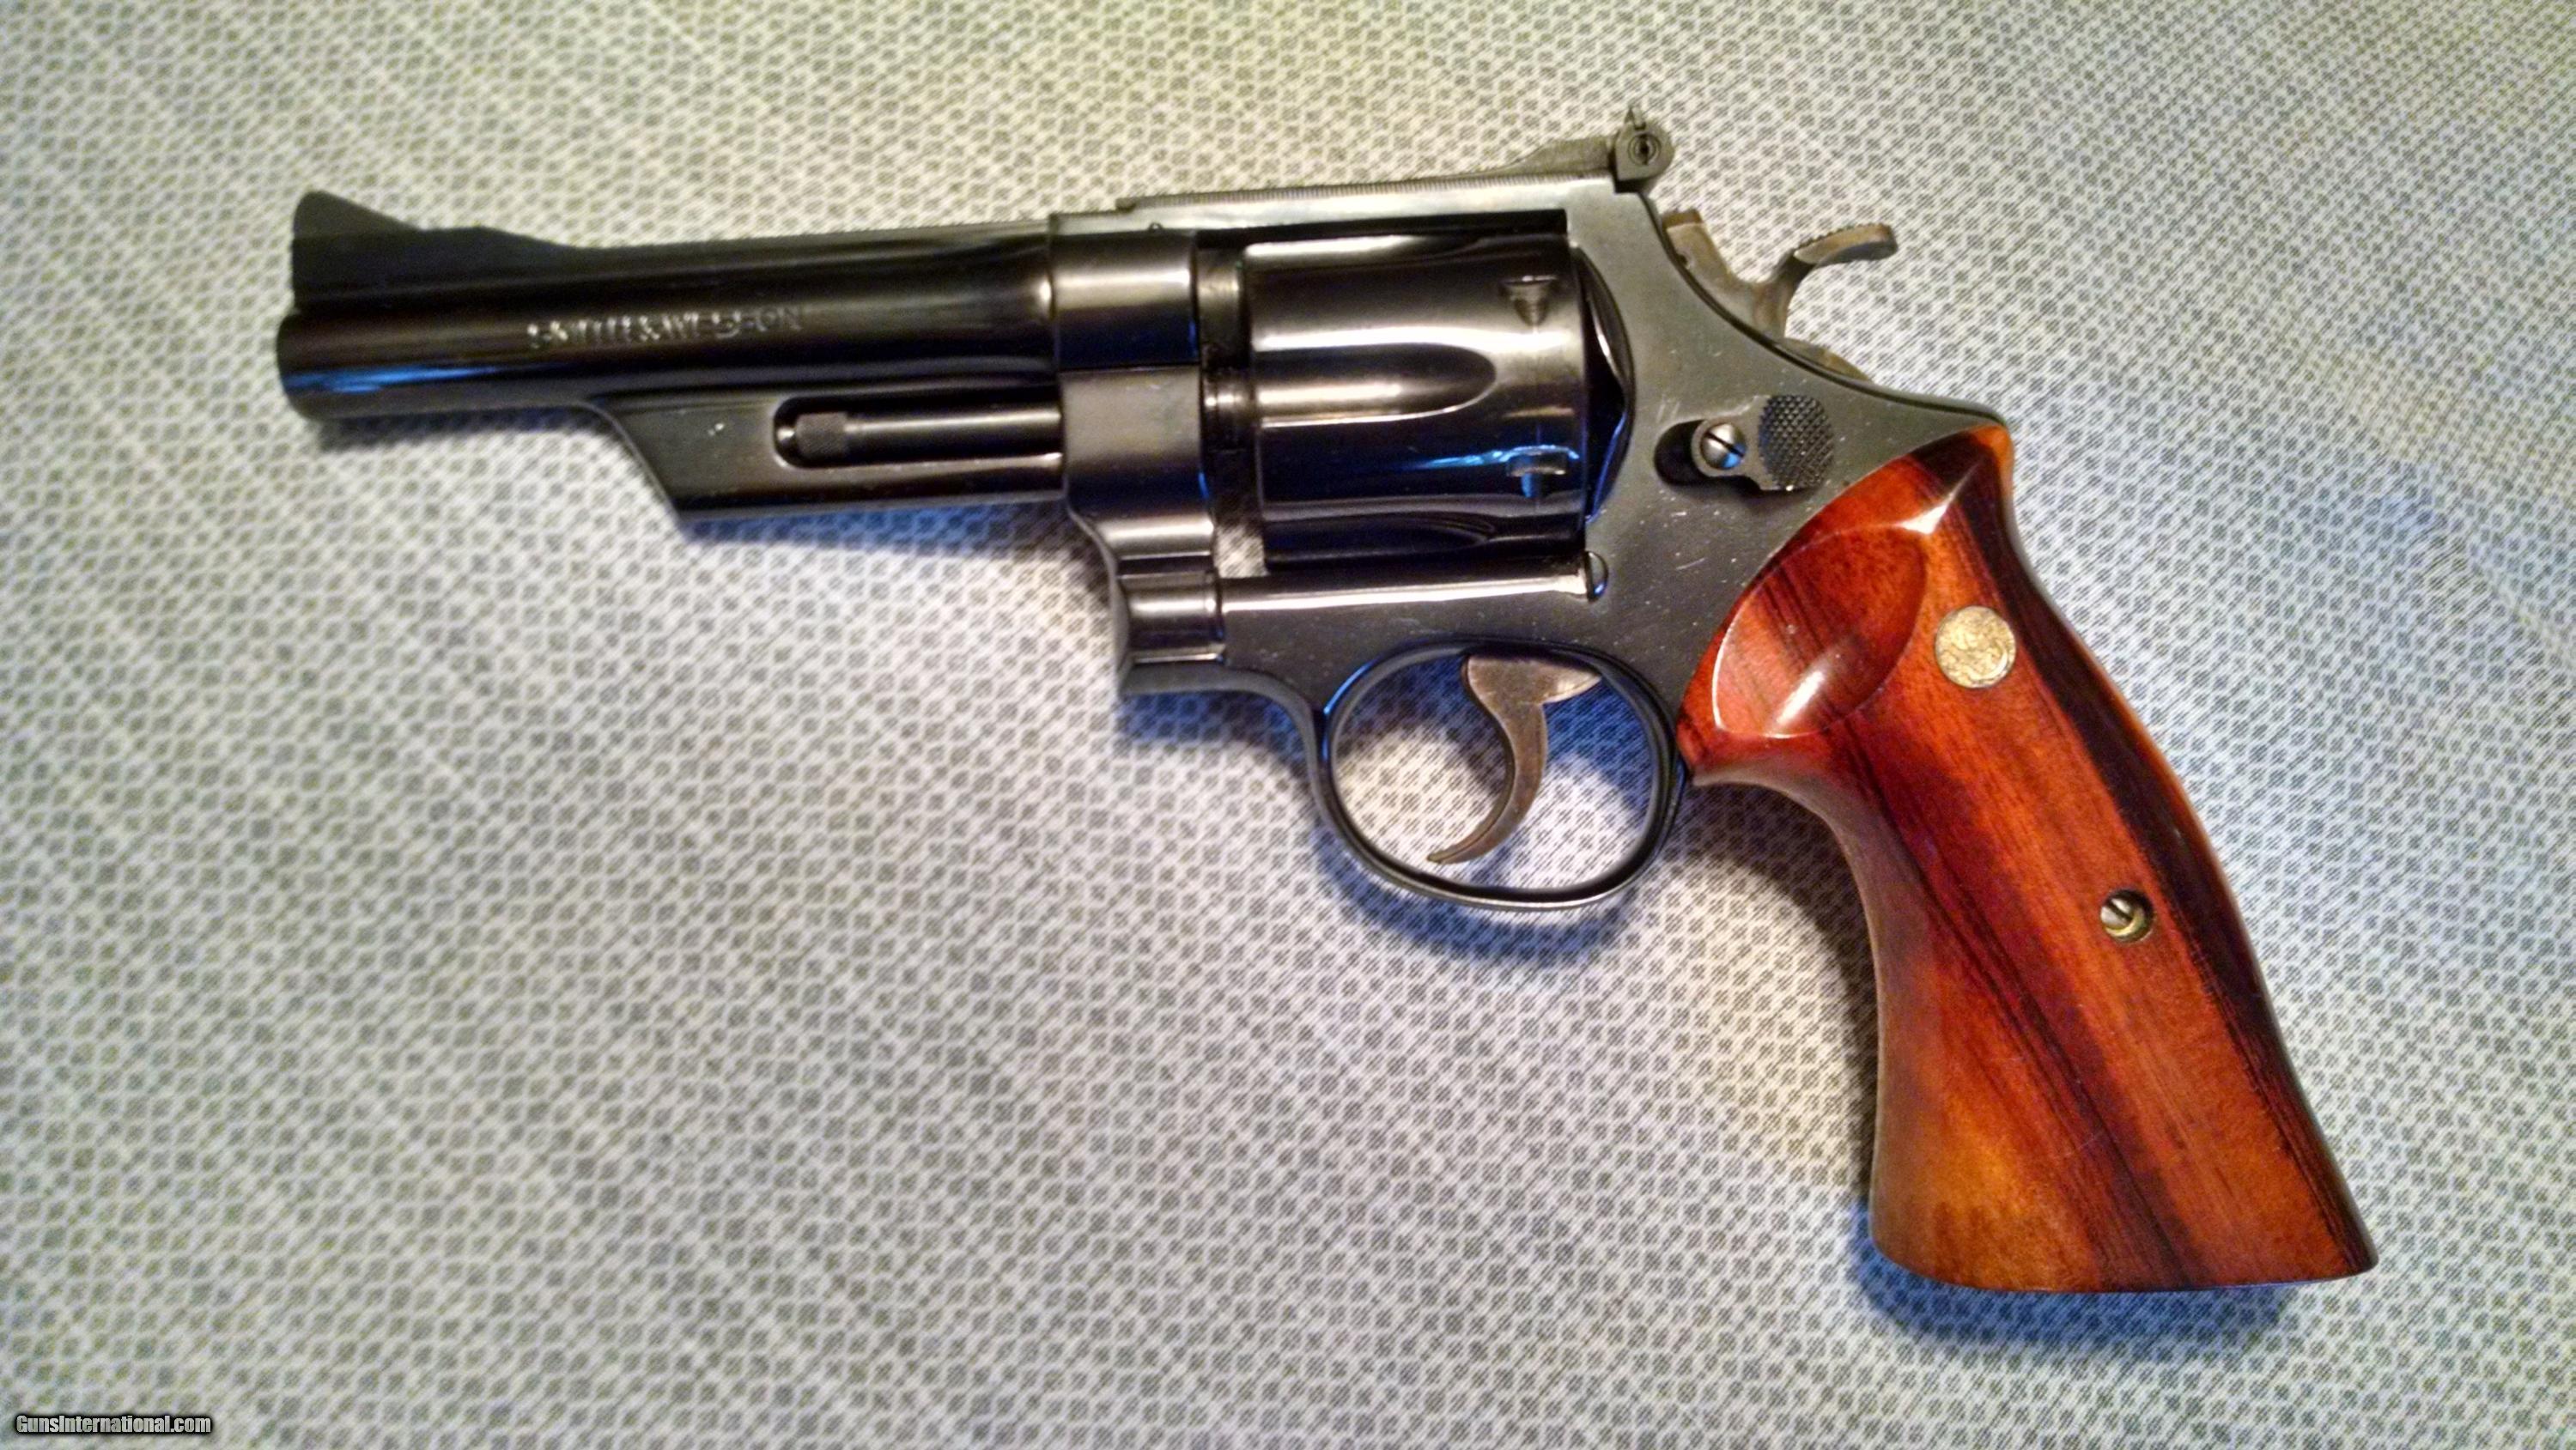 Smith & Wesson Model 27-2 357 Magnum With 5 Inch Barrel.